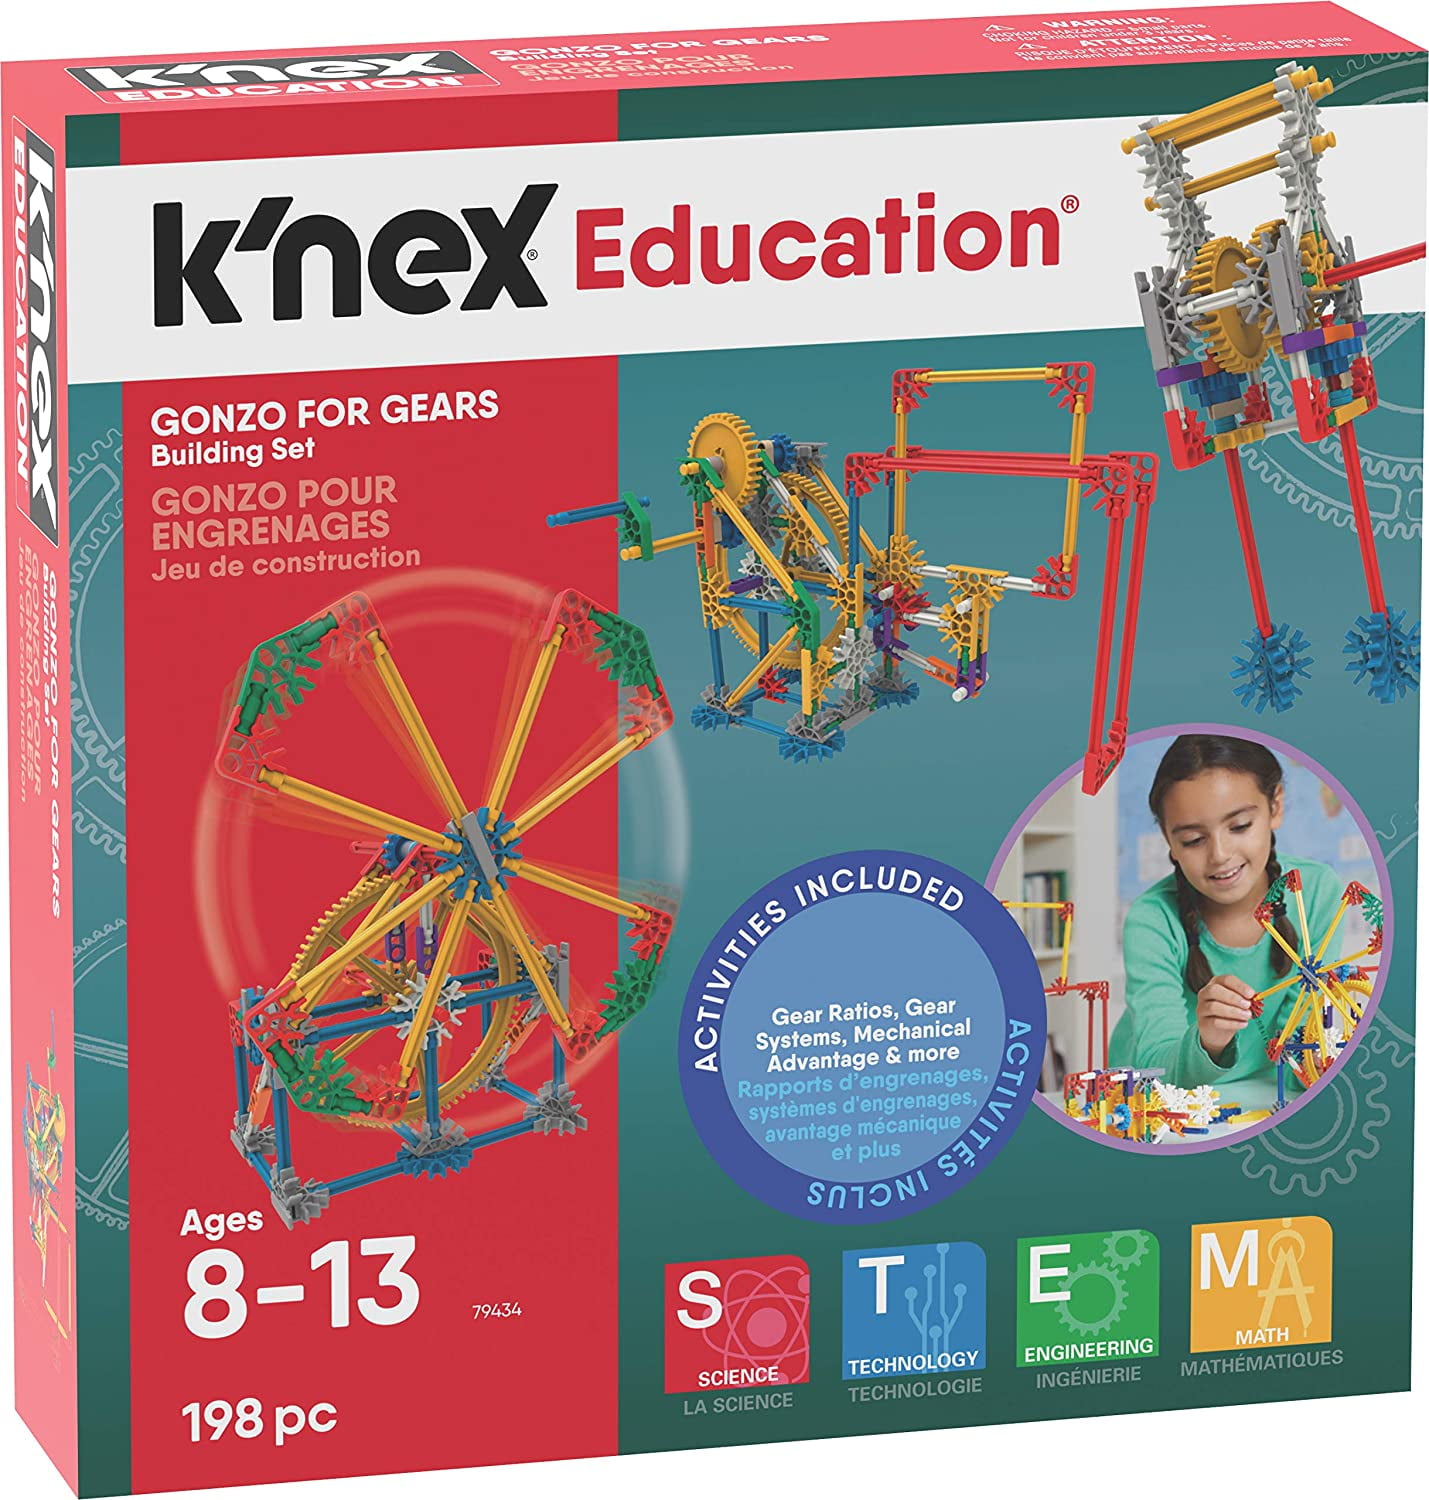 K'NEX Education Gonzo For Gears Building Set 198 pc 79434 NEW 